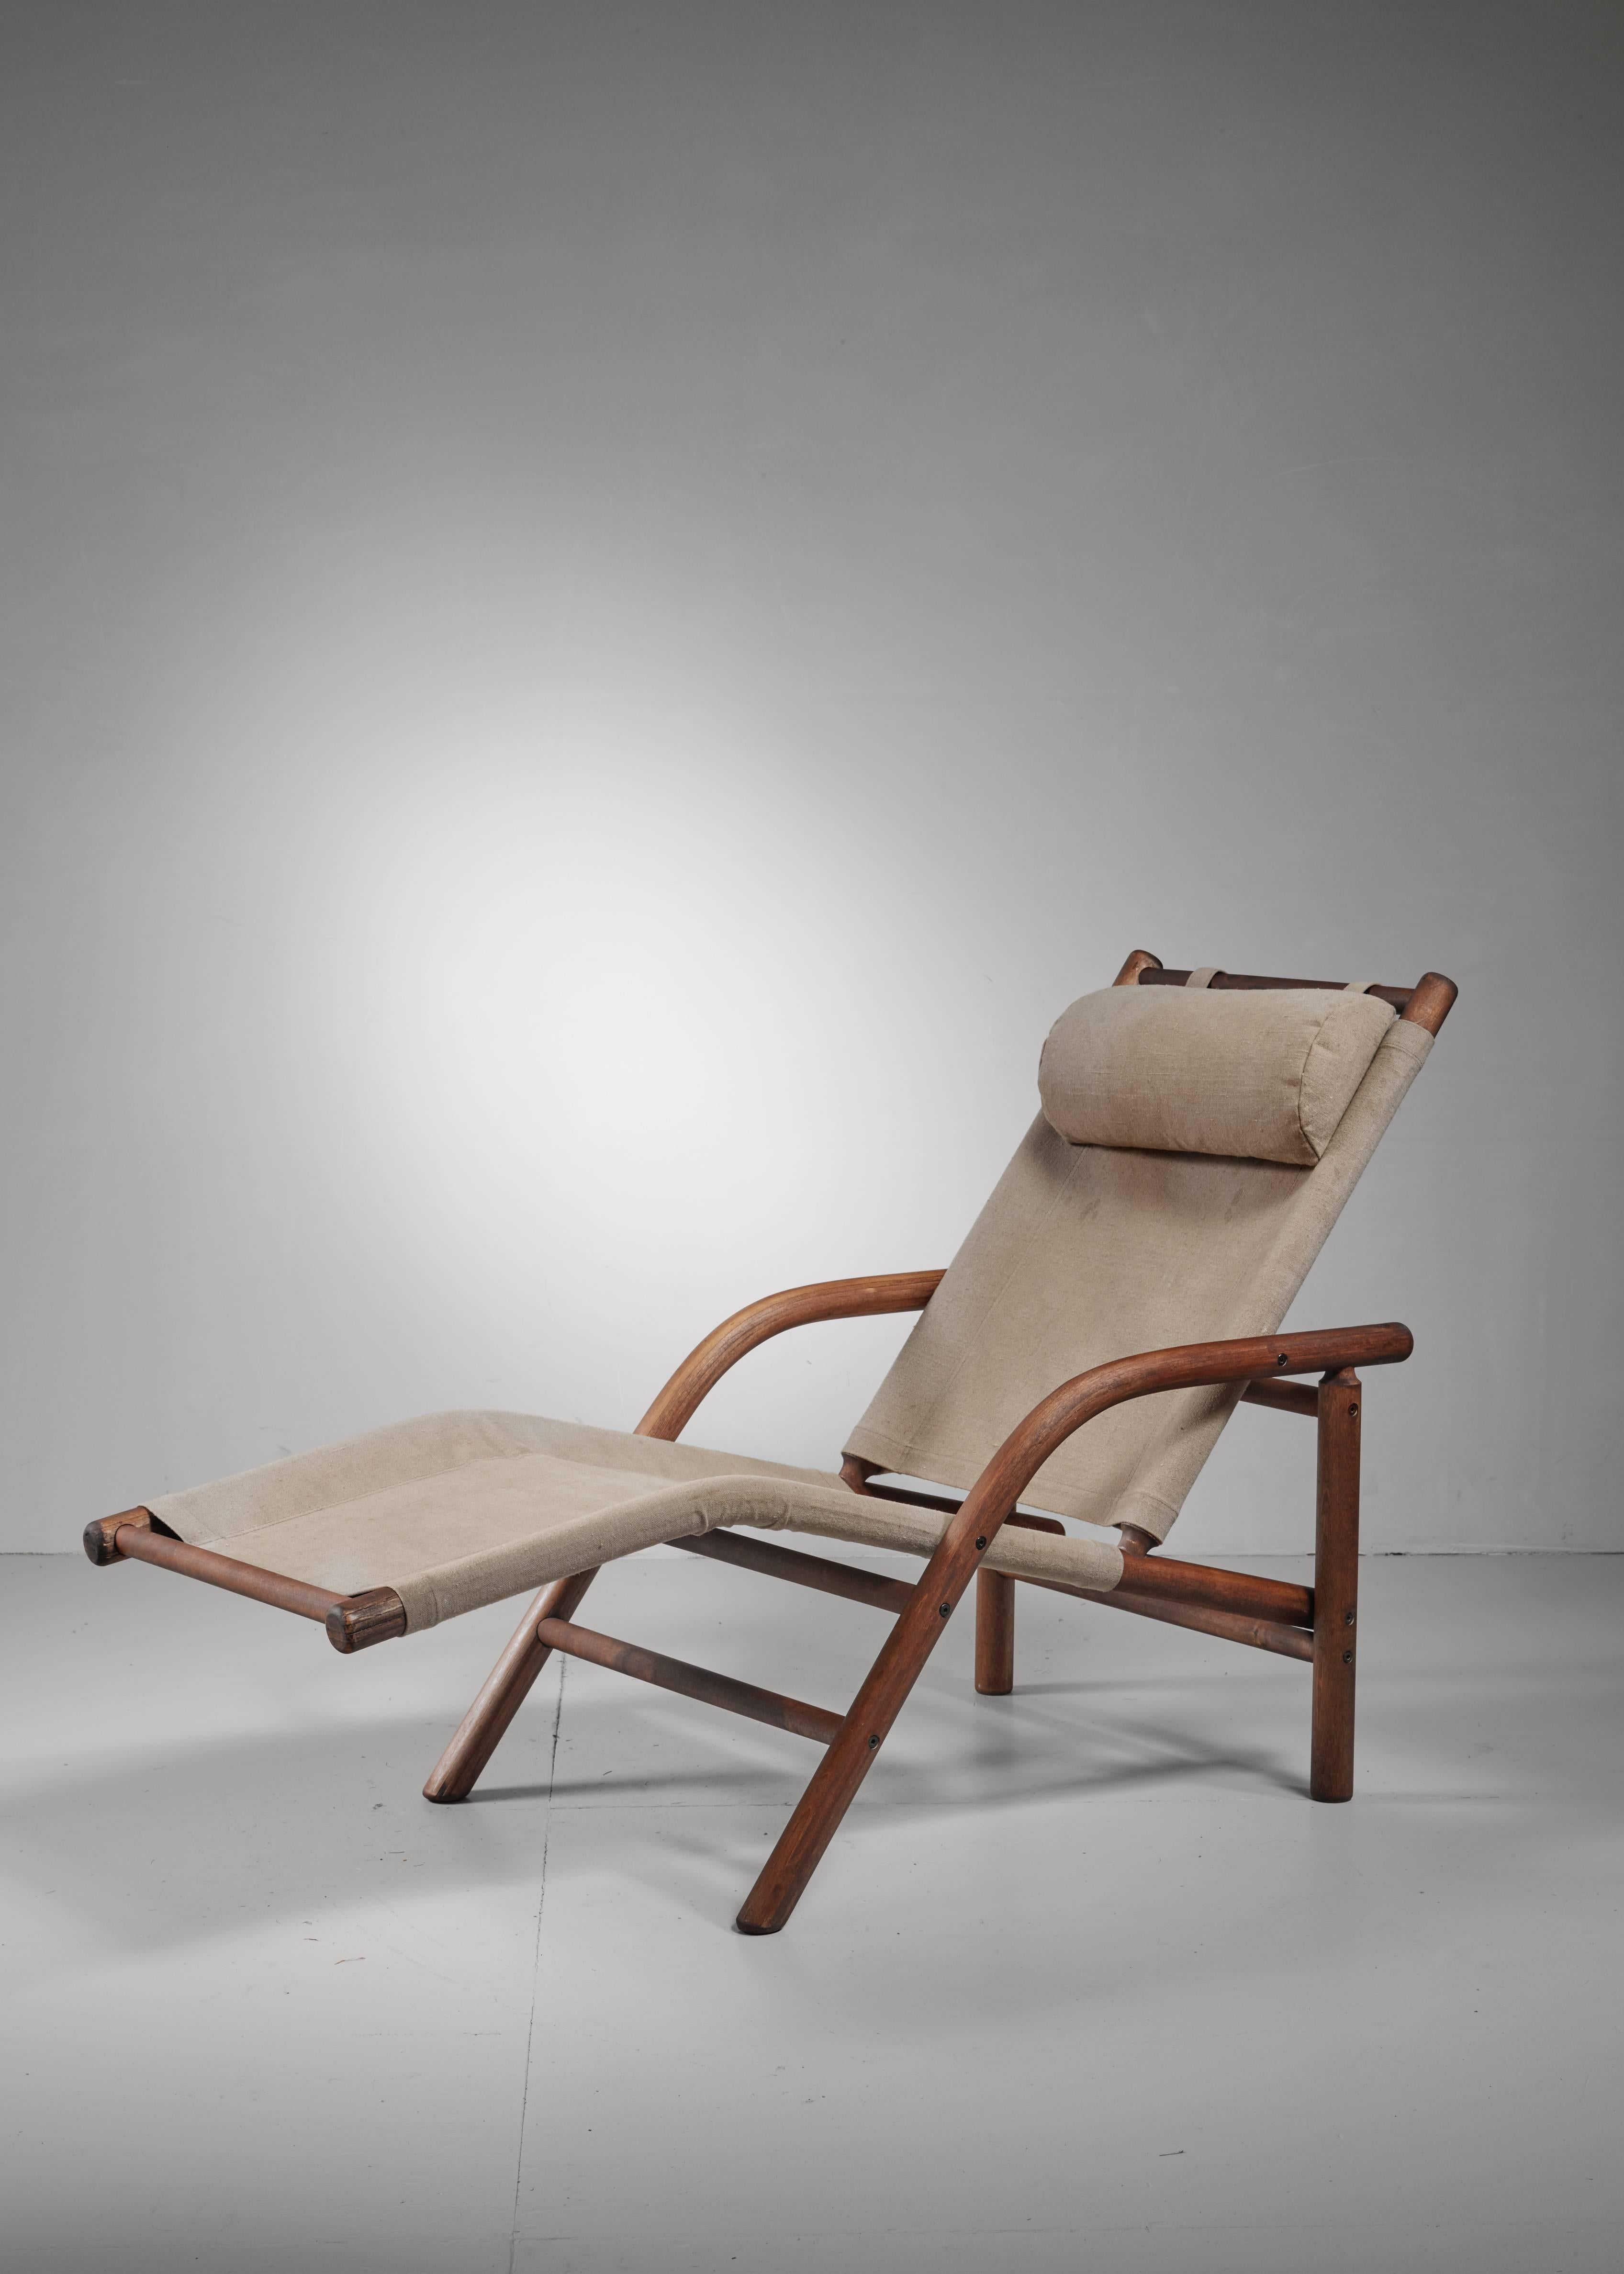 A Ben af Schulten lounge chair or chaise longue, made of bent birch with a canvas seating and in a mint condition.